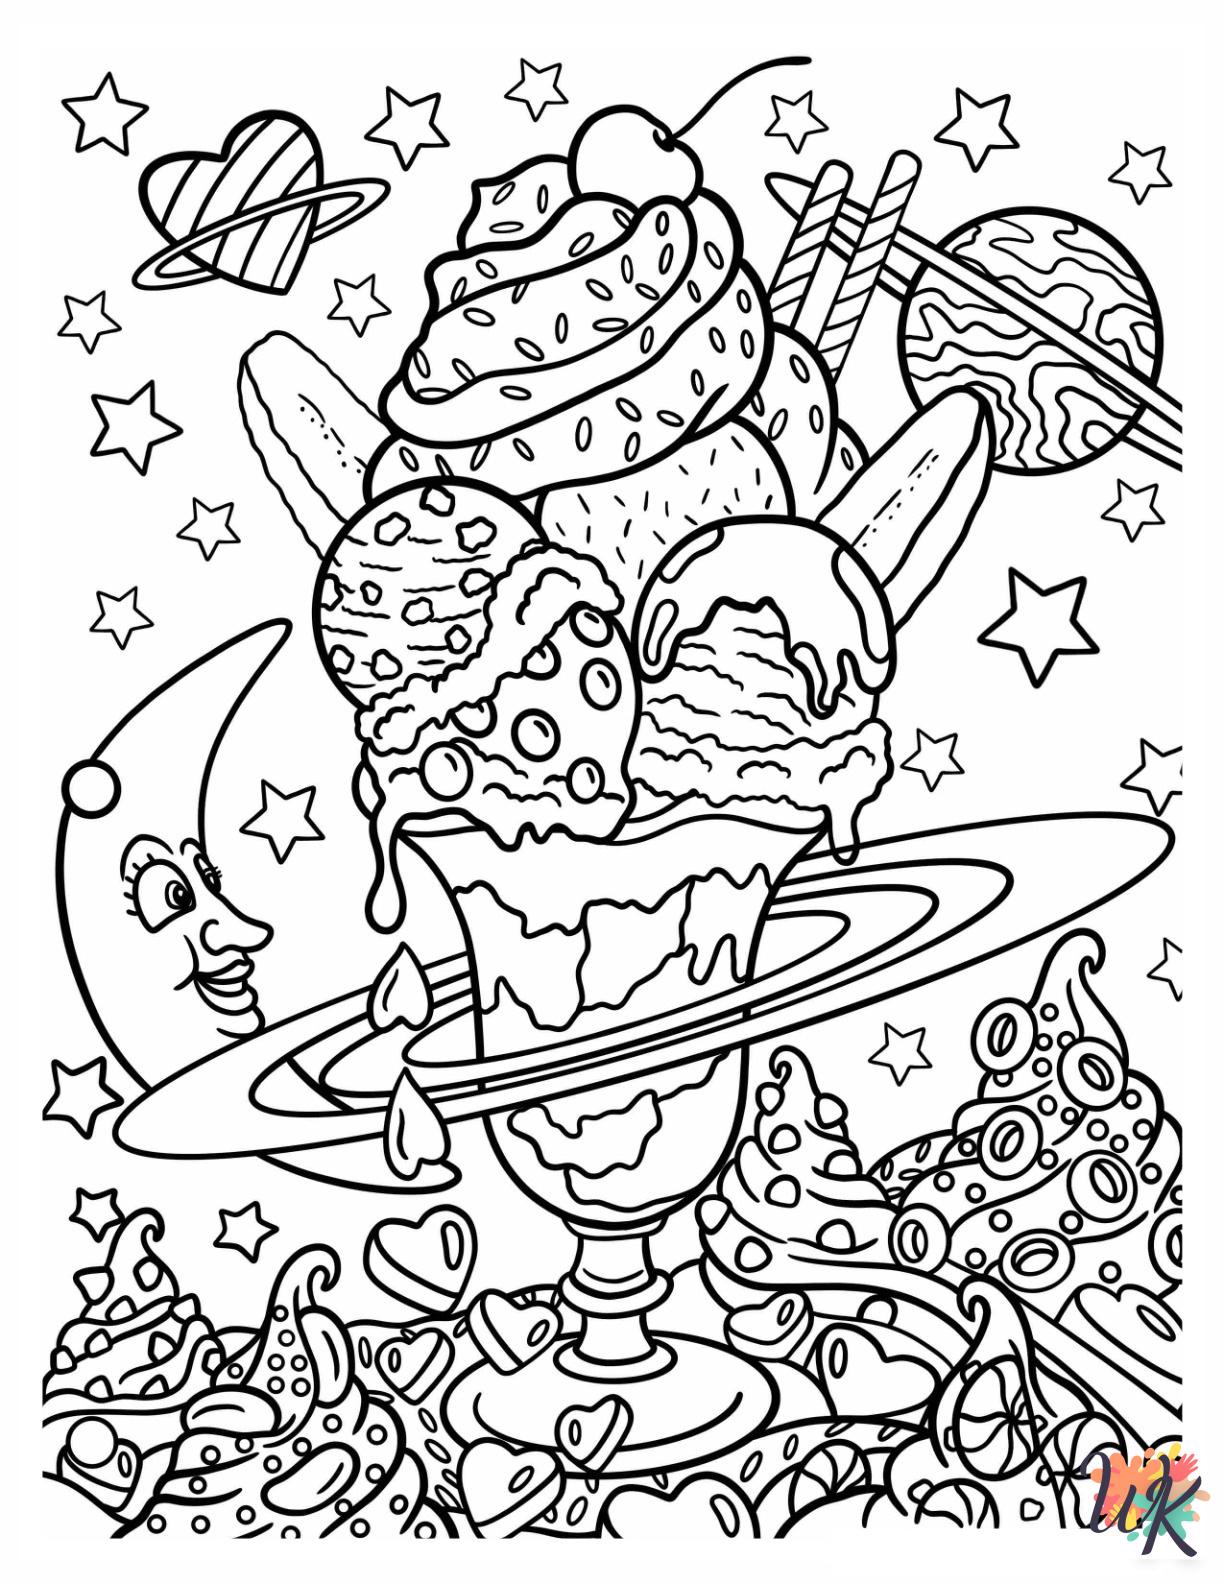 Lisa Frank coloring pages for adults easy